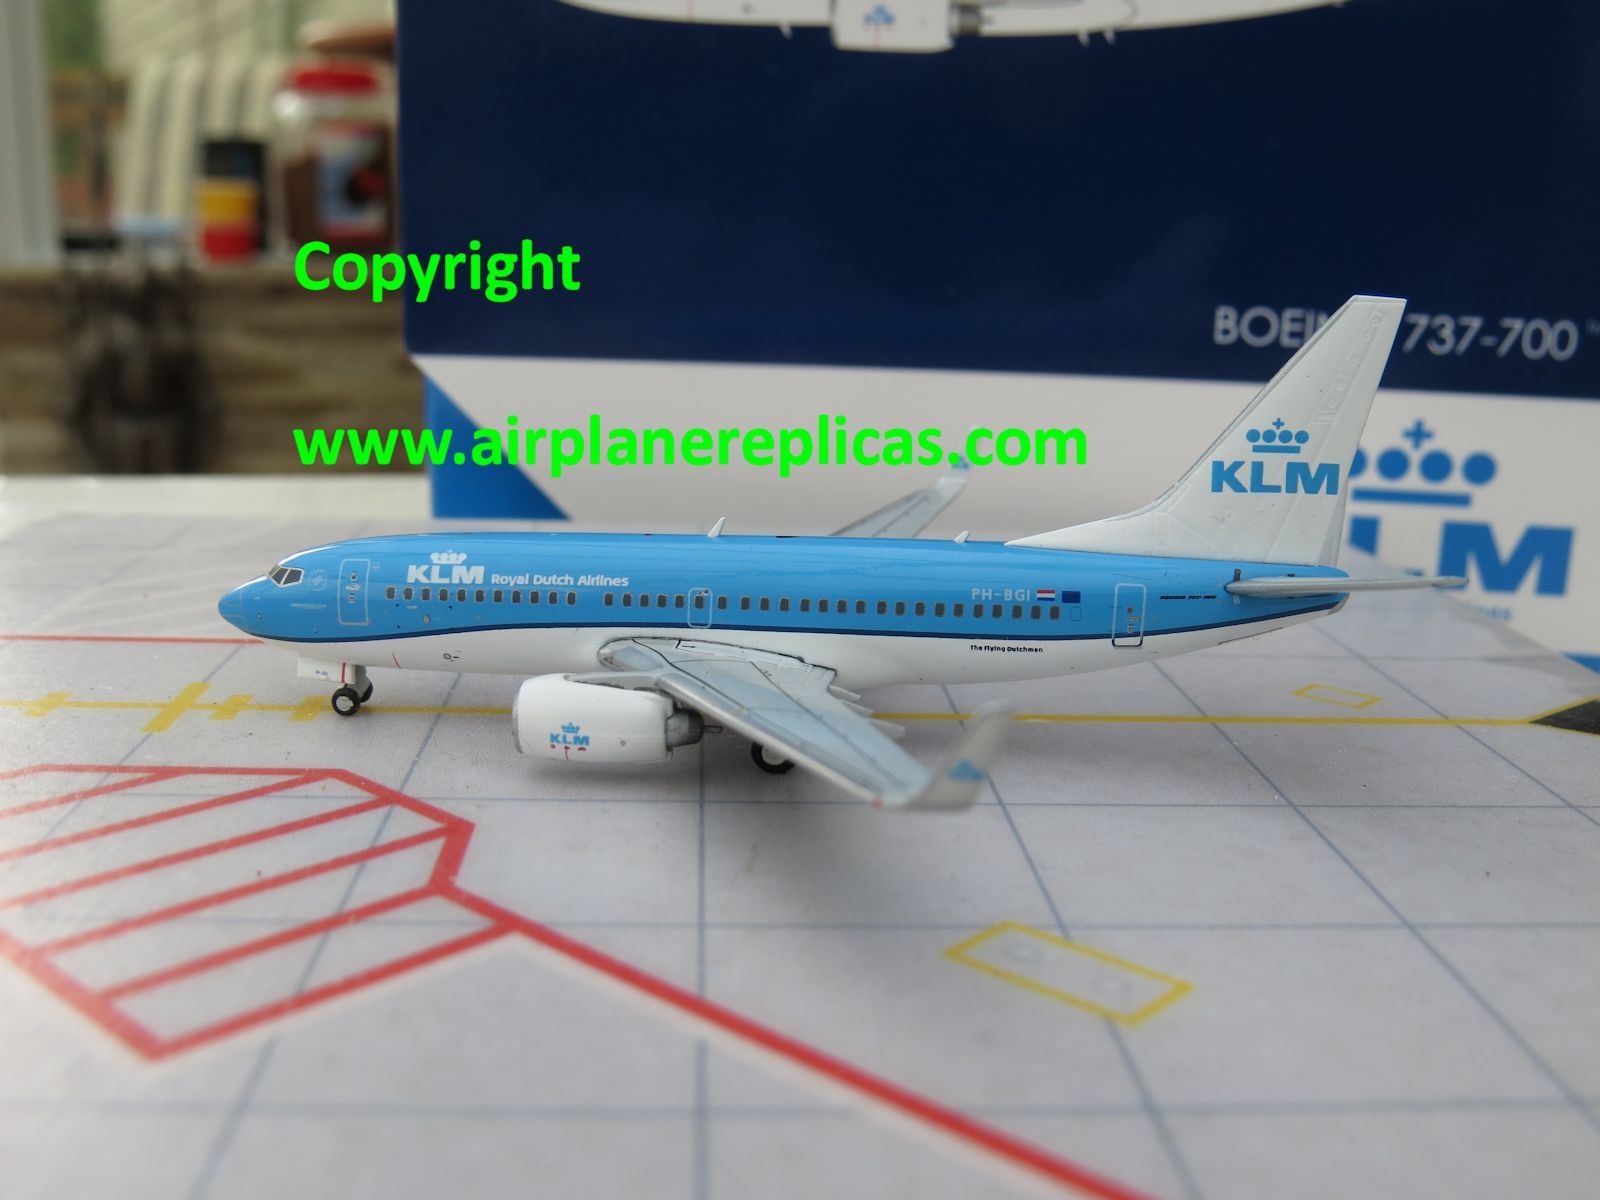 KLM Boeing 737-700 1:200 Scale Collectible airplane aircraft Model B737 B738 